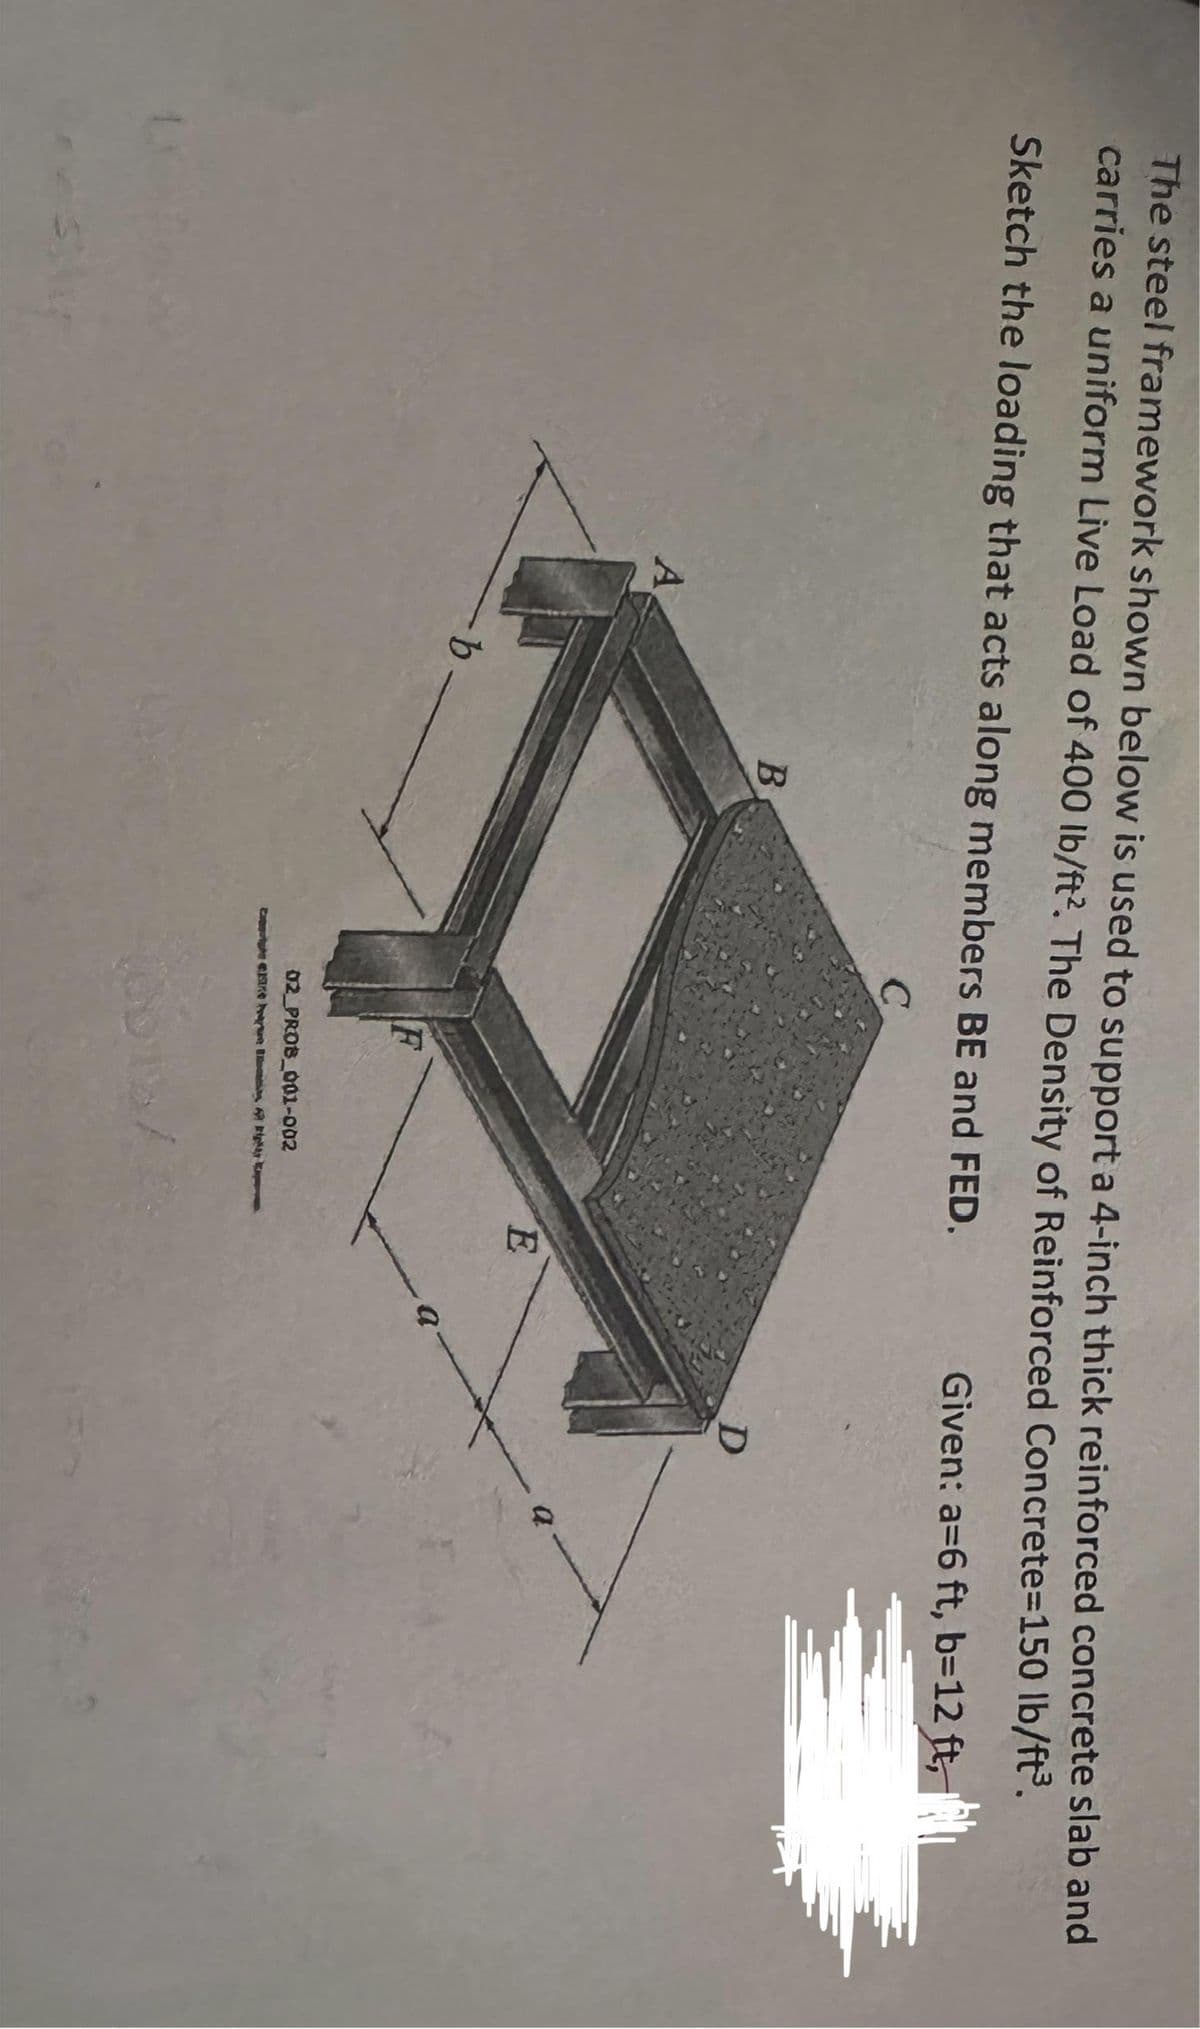 The steel framework shown below is used to support a 4-inch thick reinforced concrete slab and
carries a uniform Live Load of 400 lb/ft2. The Density of Reinforced Concrete=150 lb/ft³.
Sketch the loading that acts along members BE and FED.
C
A
-b-
B
F
02 PROB_001-002
Carte Cake
E
a
Given: a=6 ft, b=12 ft,
0
D
a